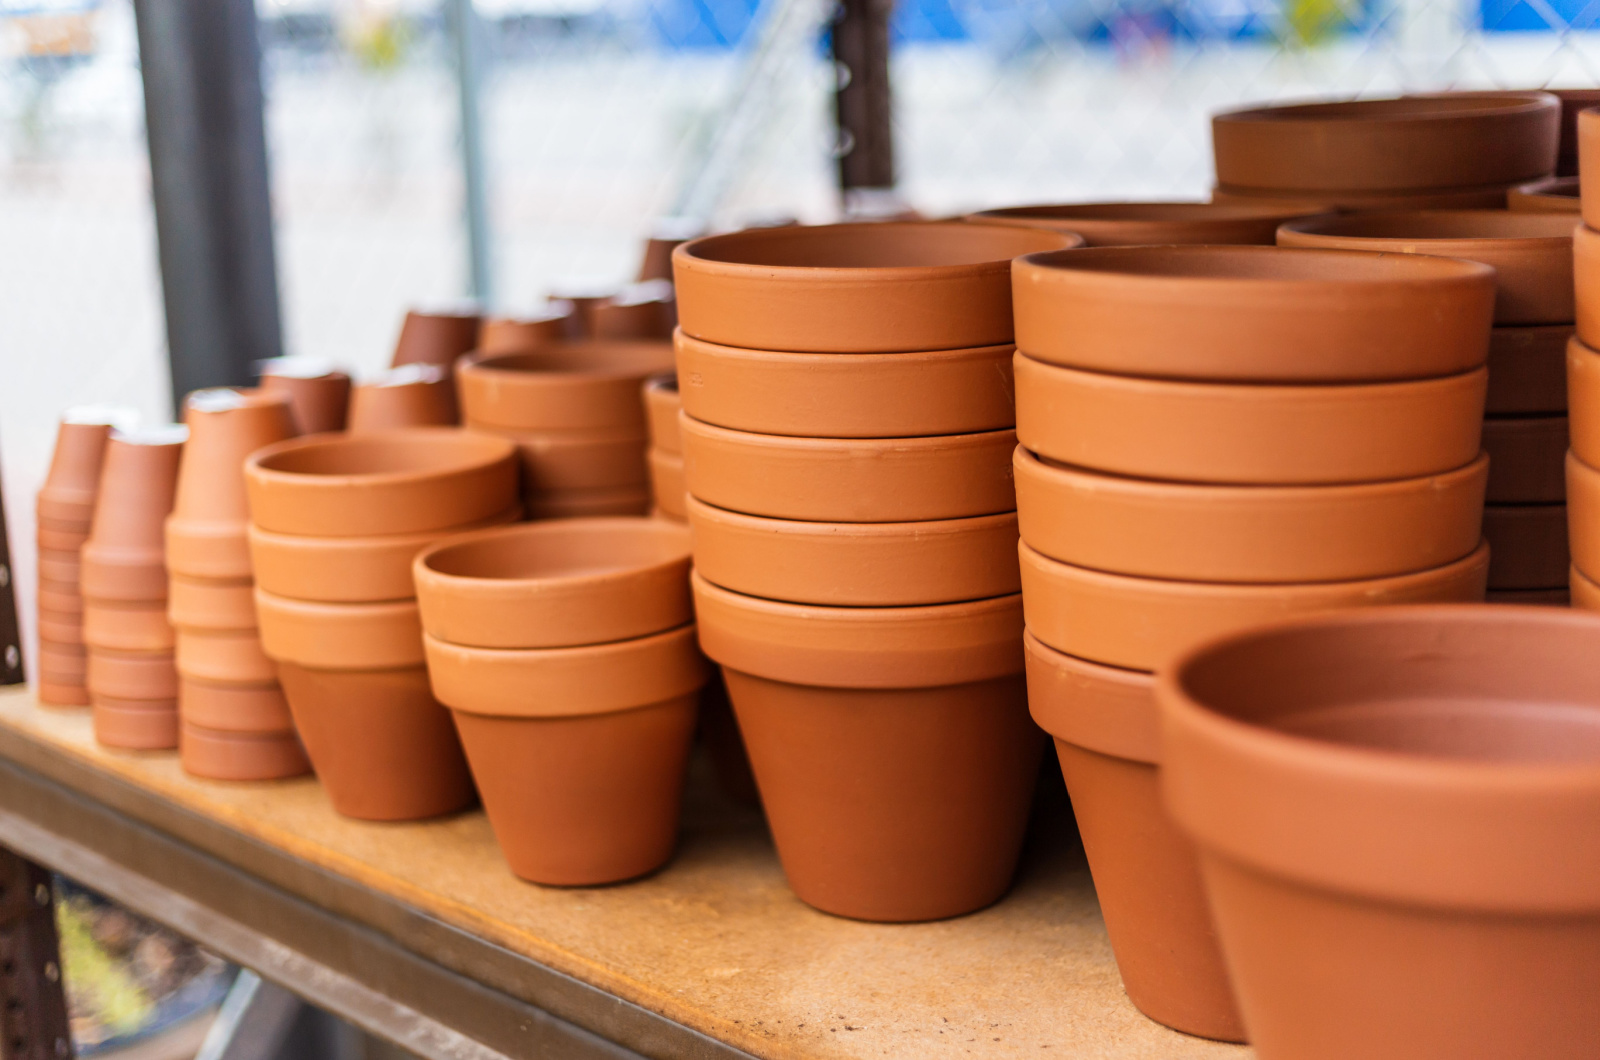 Stacked red clay pots for planting